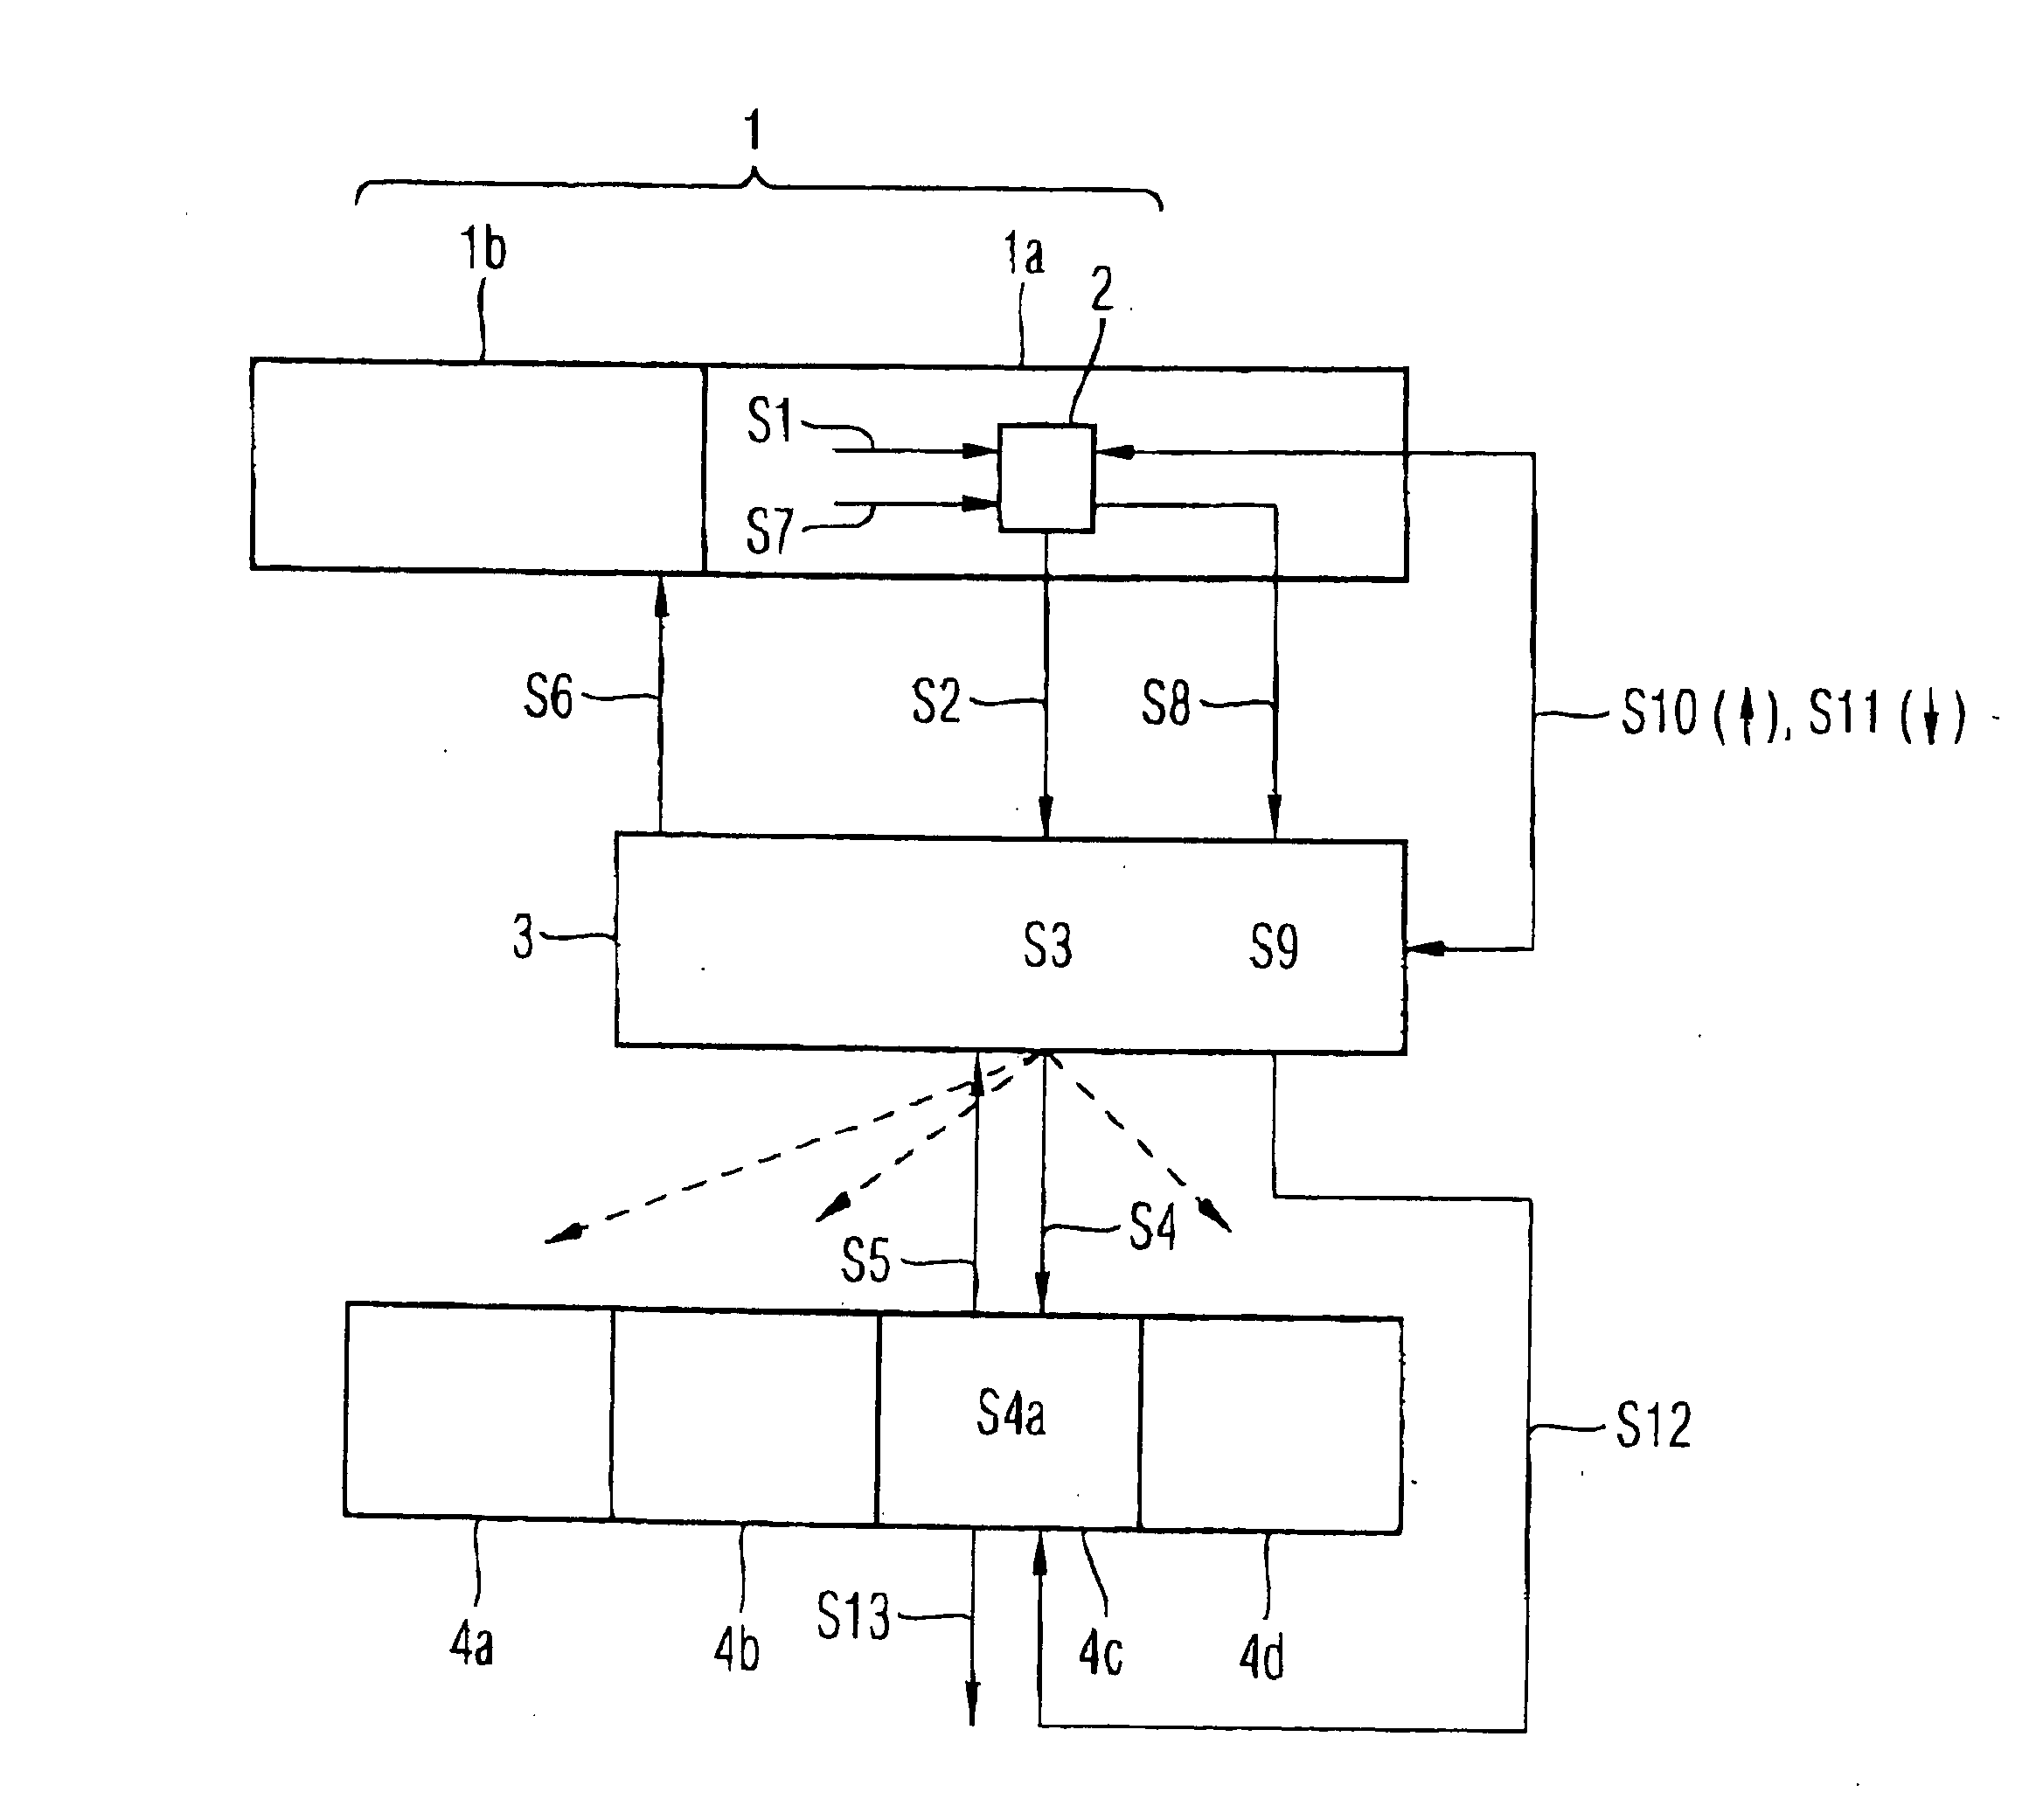 Method for Carrying Out an Electronic Transaction